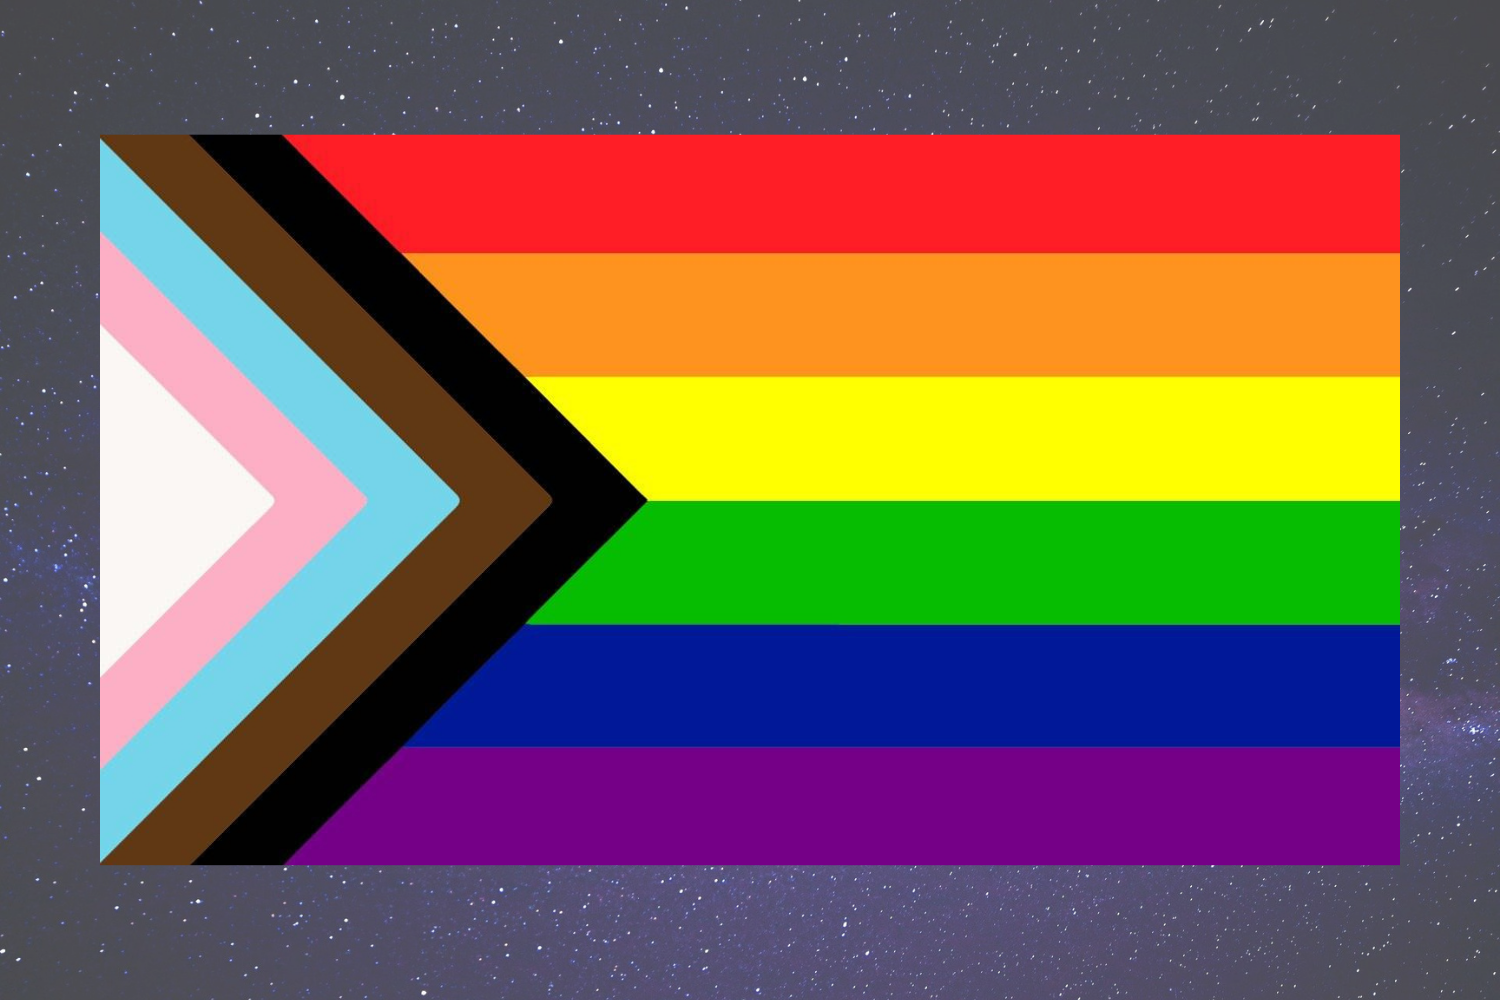 The Progress Pride Flag - A flag with 6 horizontal stripes and a chevron on the left hand side pointing towards the right composed of a white triangle, followed by 4 stripes. The 6 horizontal stripes from top to bottom: red, orange, yellow, green, blue, purple. The 4 chevron stripes from left to right: pink, blue, brown, black. The horizontal stripes represent life, healing, sunlight, nature, serenity, and spirit respectively. The chevron represents the HIV+, transgender, and POC communities, how there is still work to be done, and how the wider community needs to center those experiences when we work towards progress.